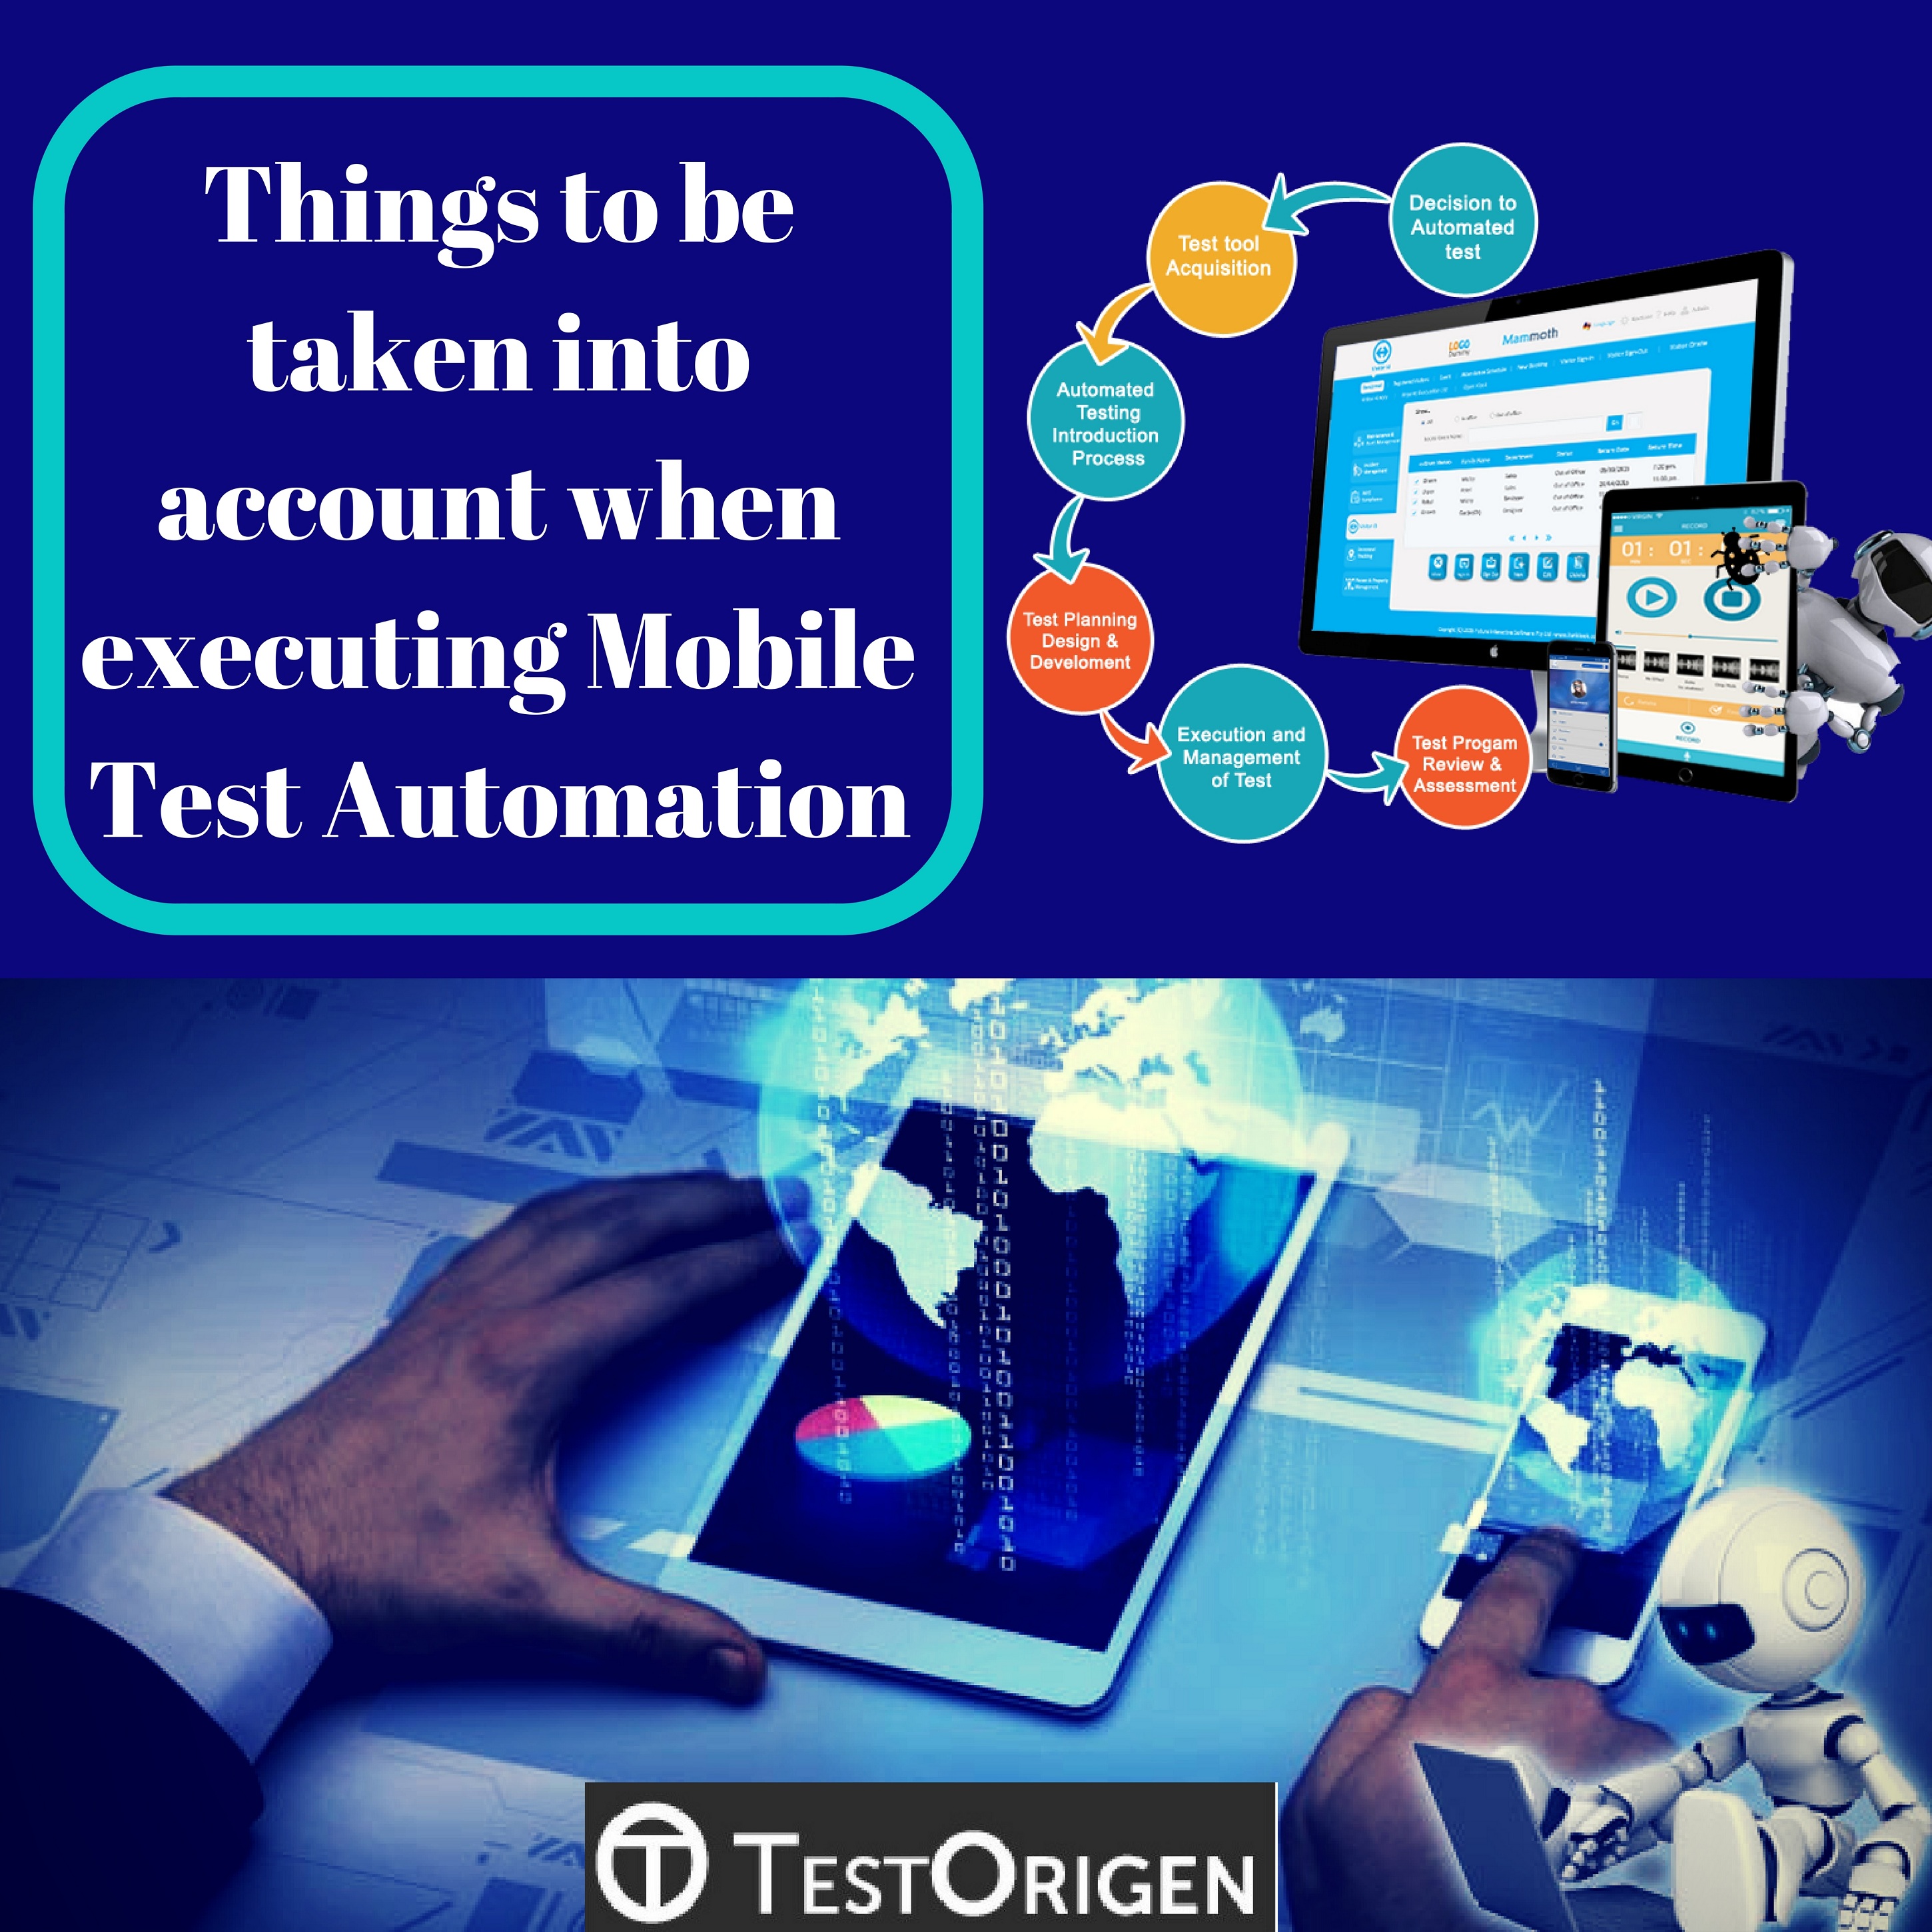 Things to be taken into account when executing Mobile Test Automation